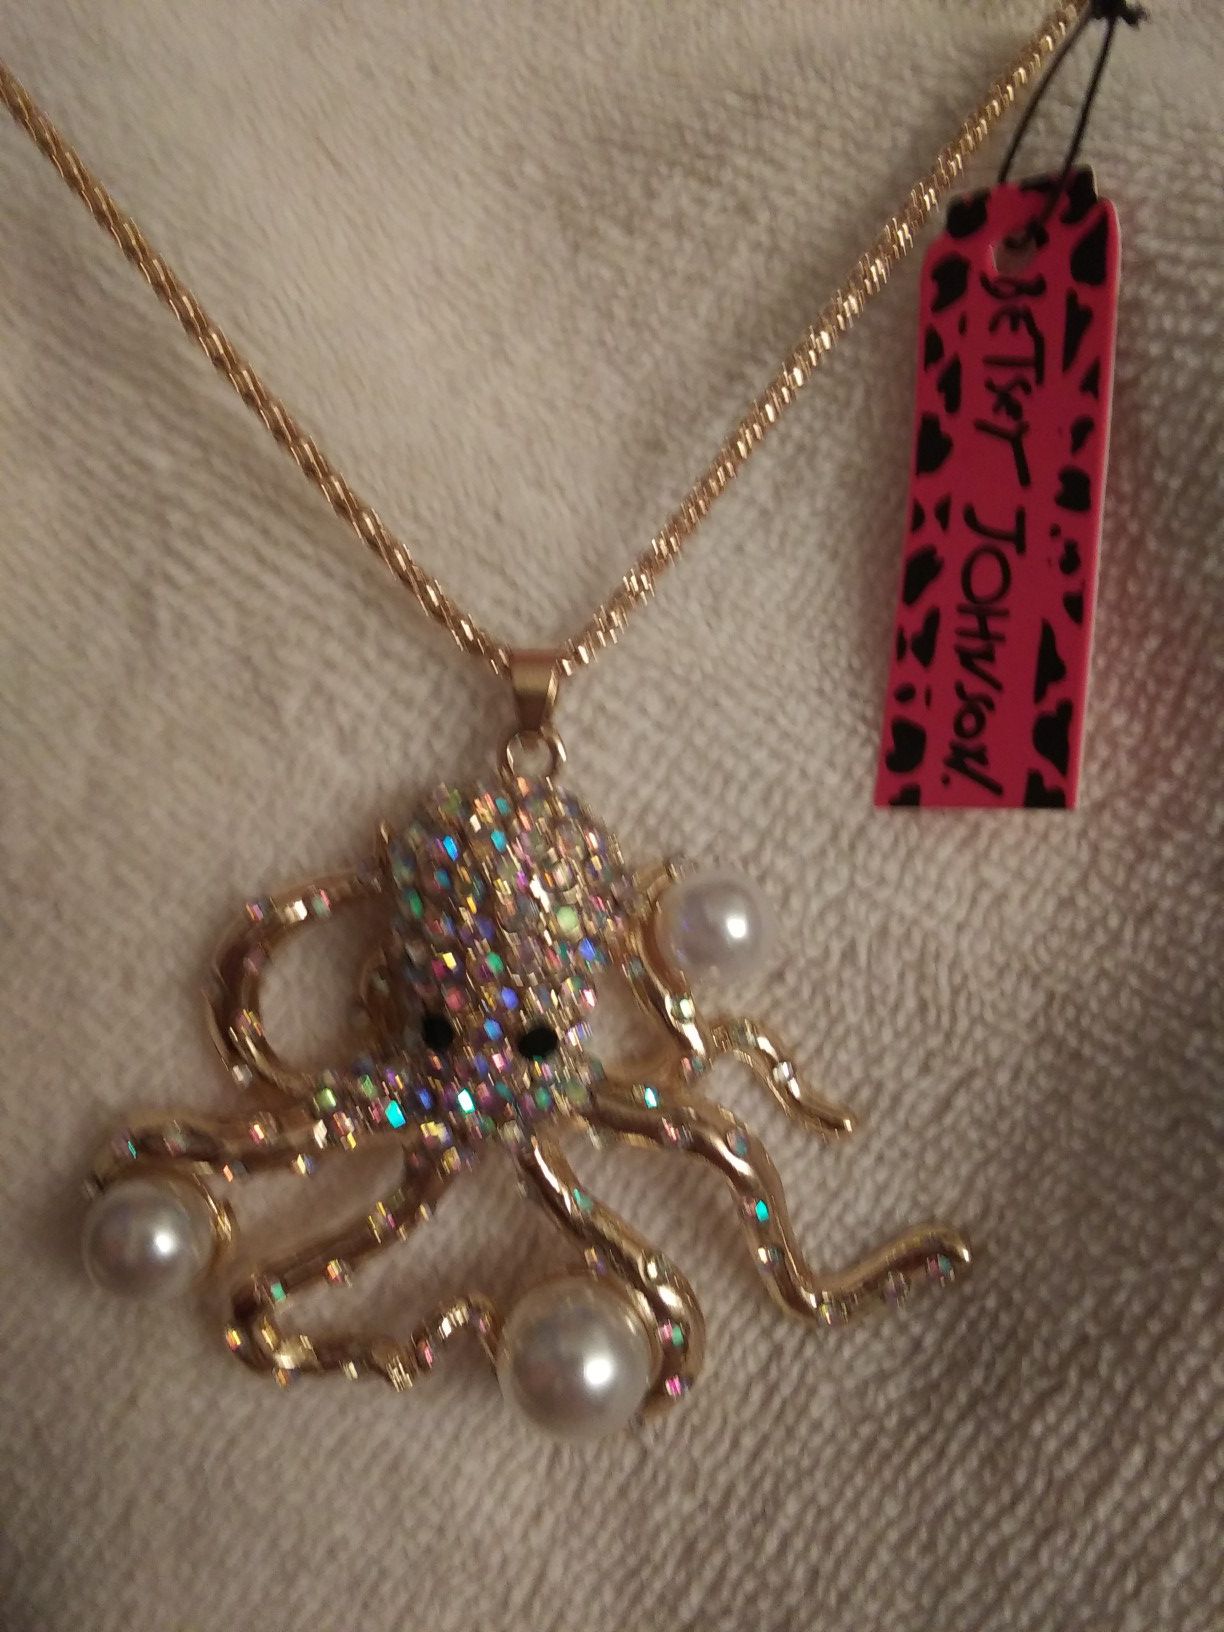 Betsey johnson "Octopus " necklace